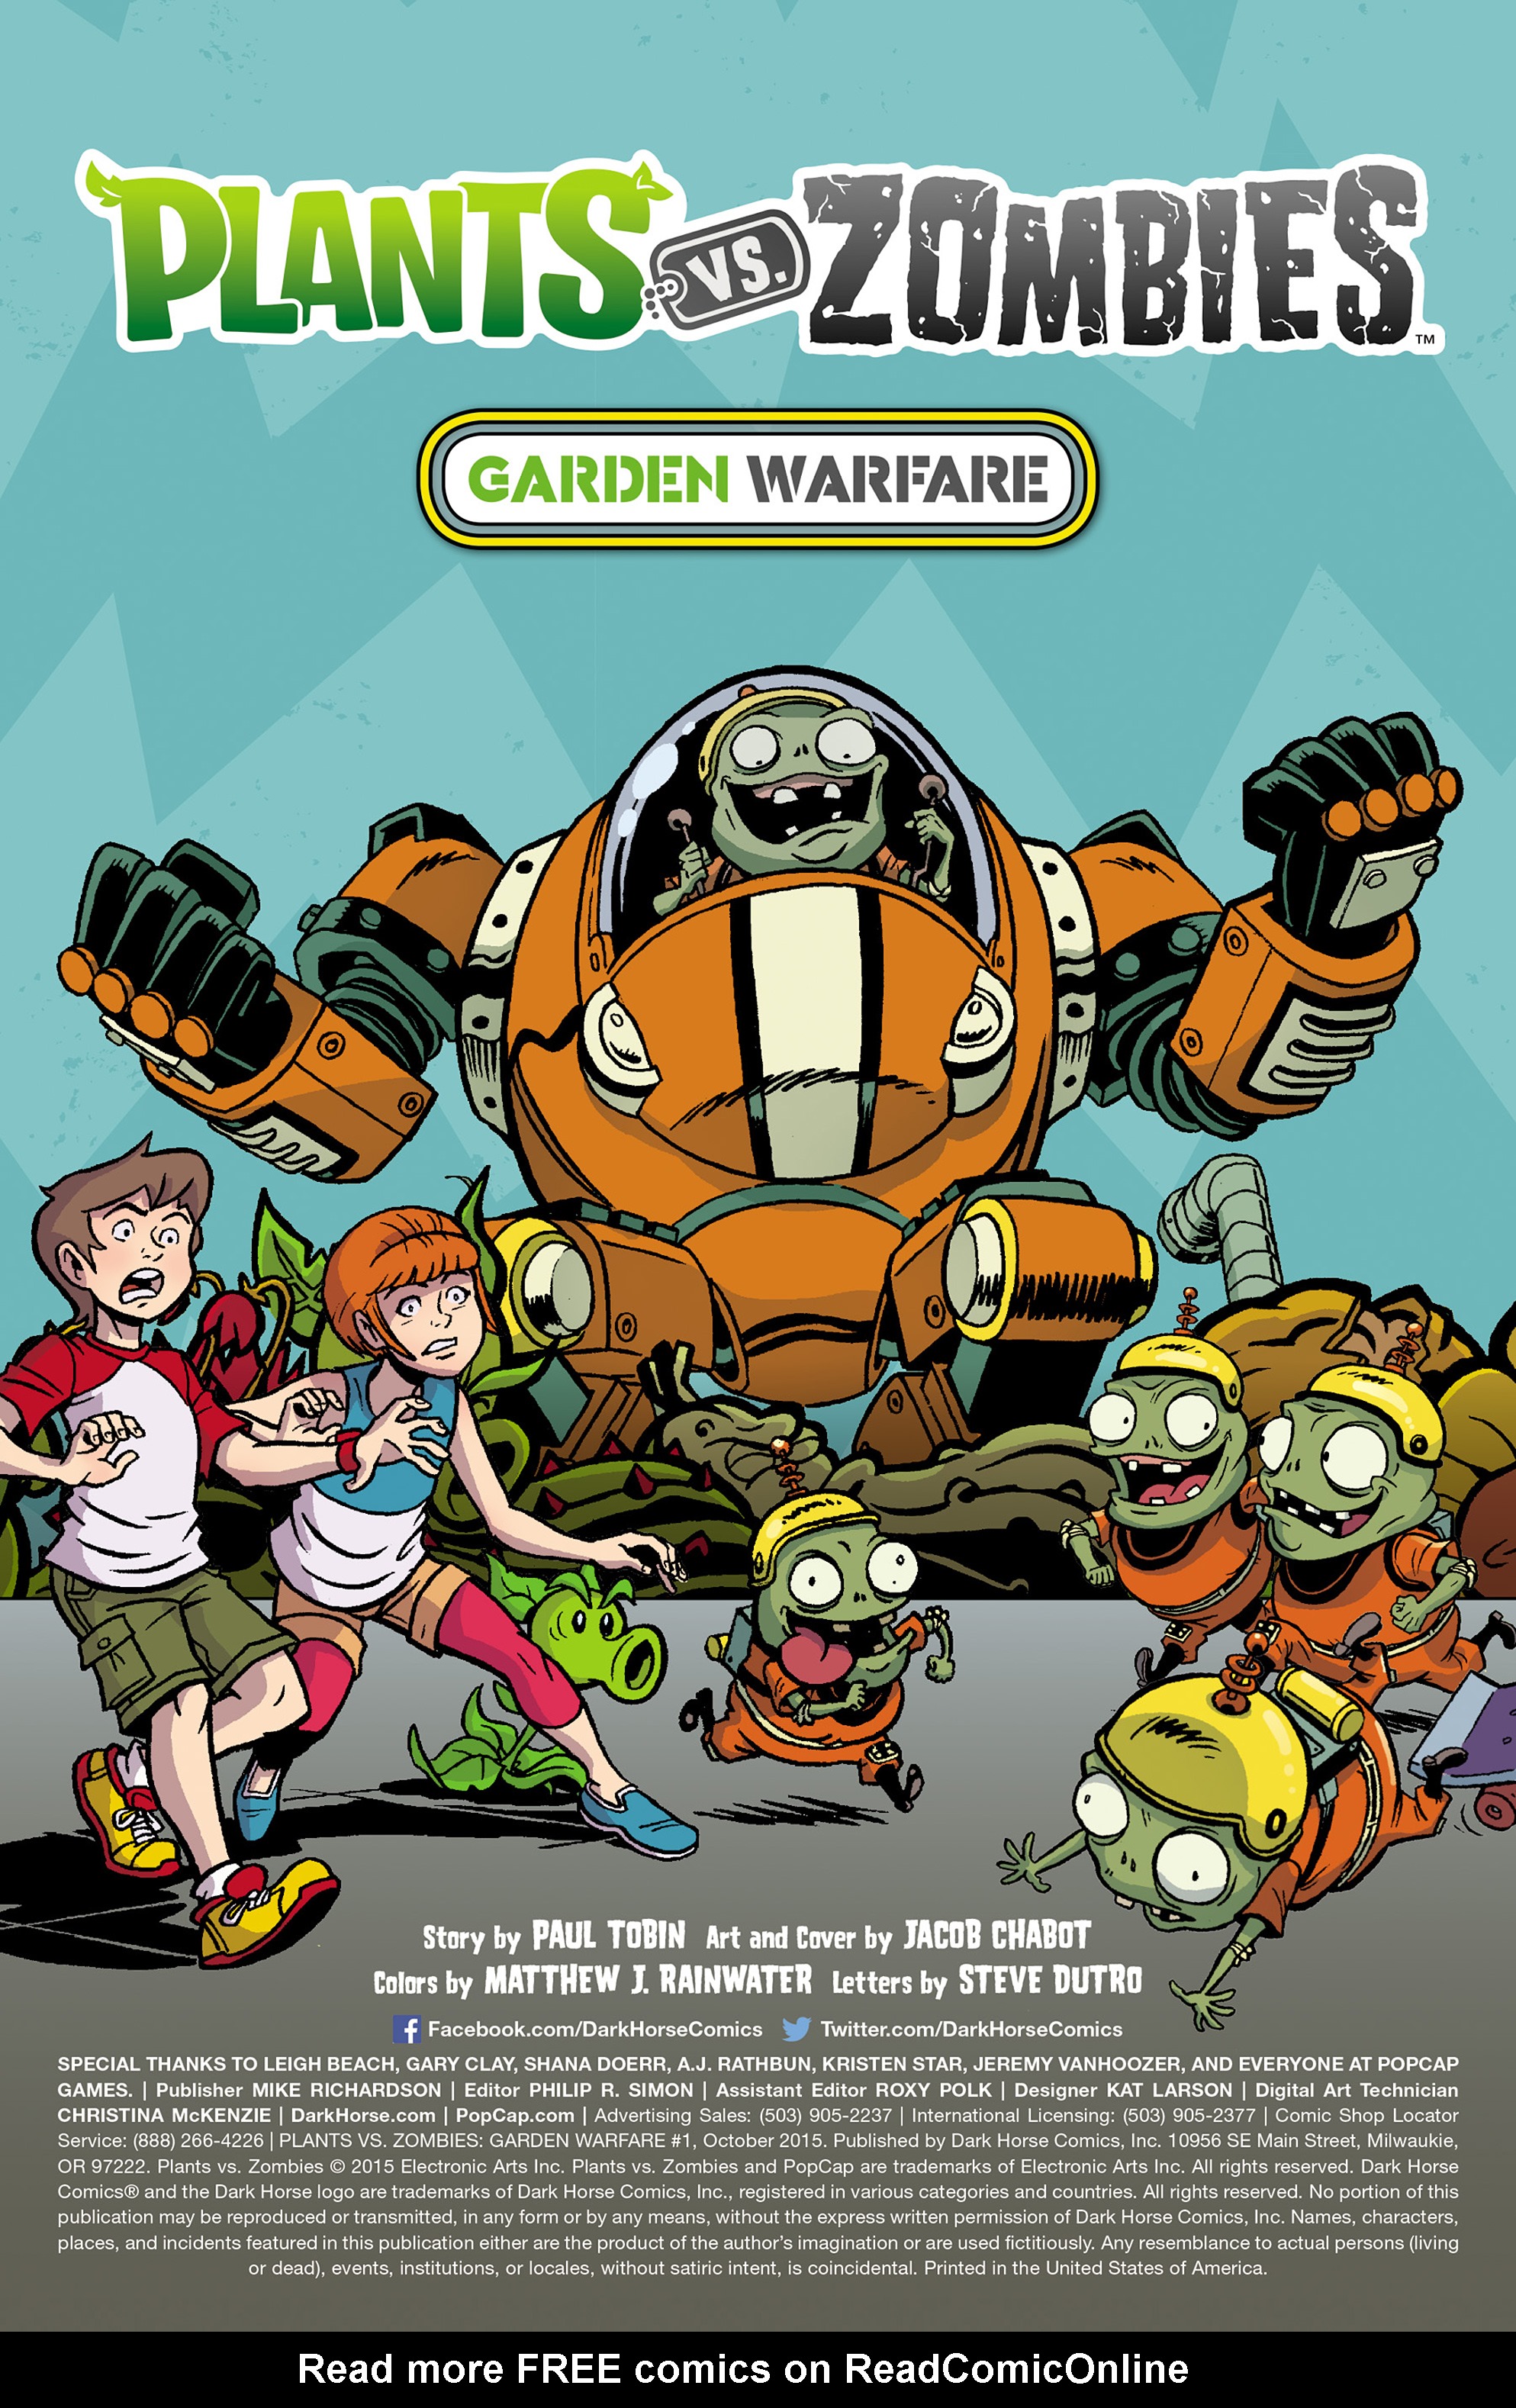 Plants vs Zombies: Bully for You #1 Review - The GCE